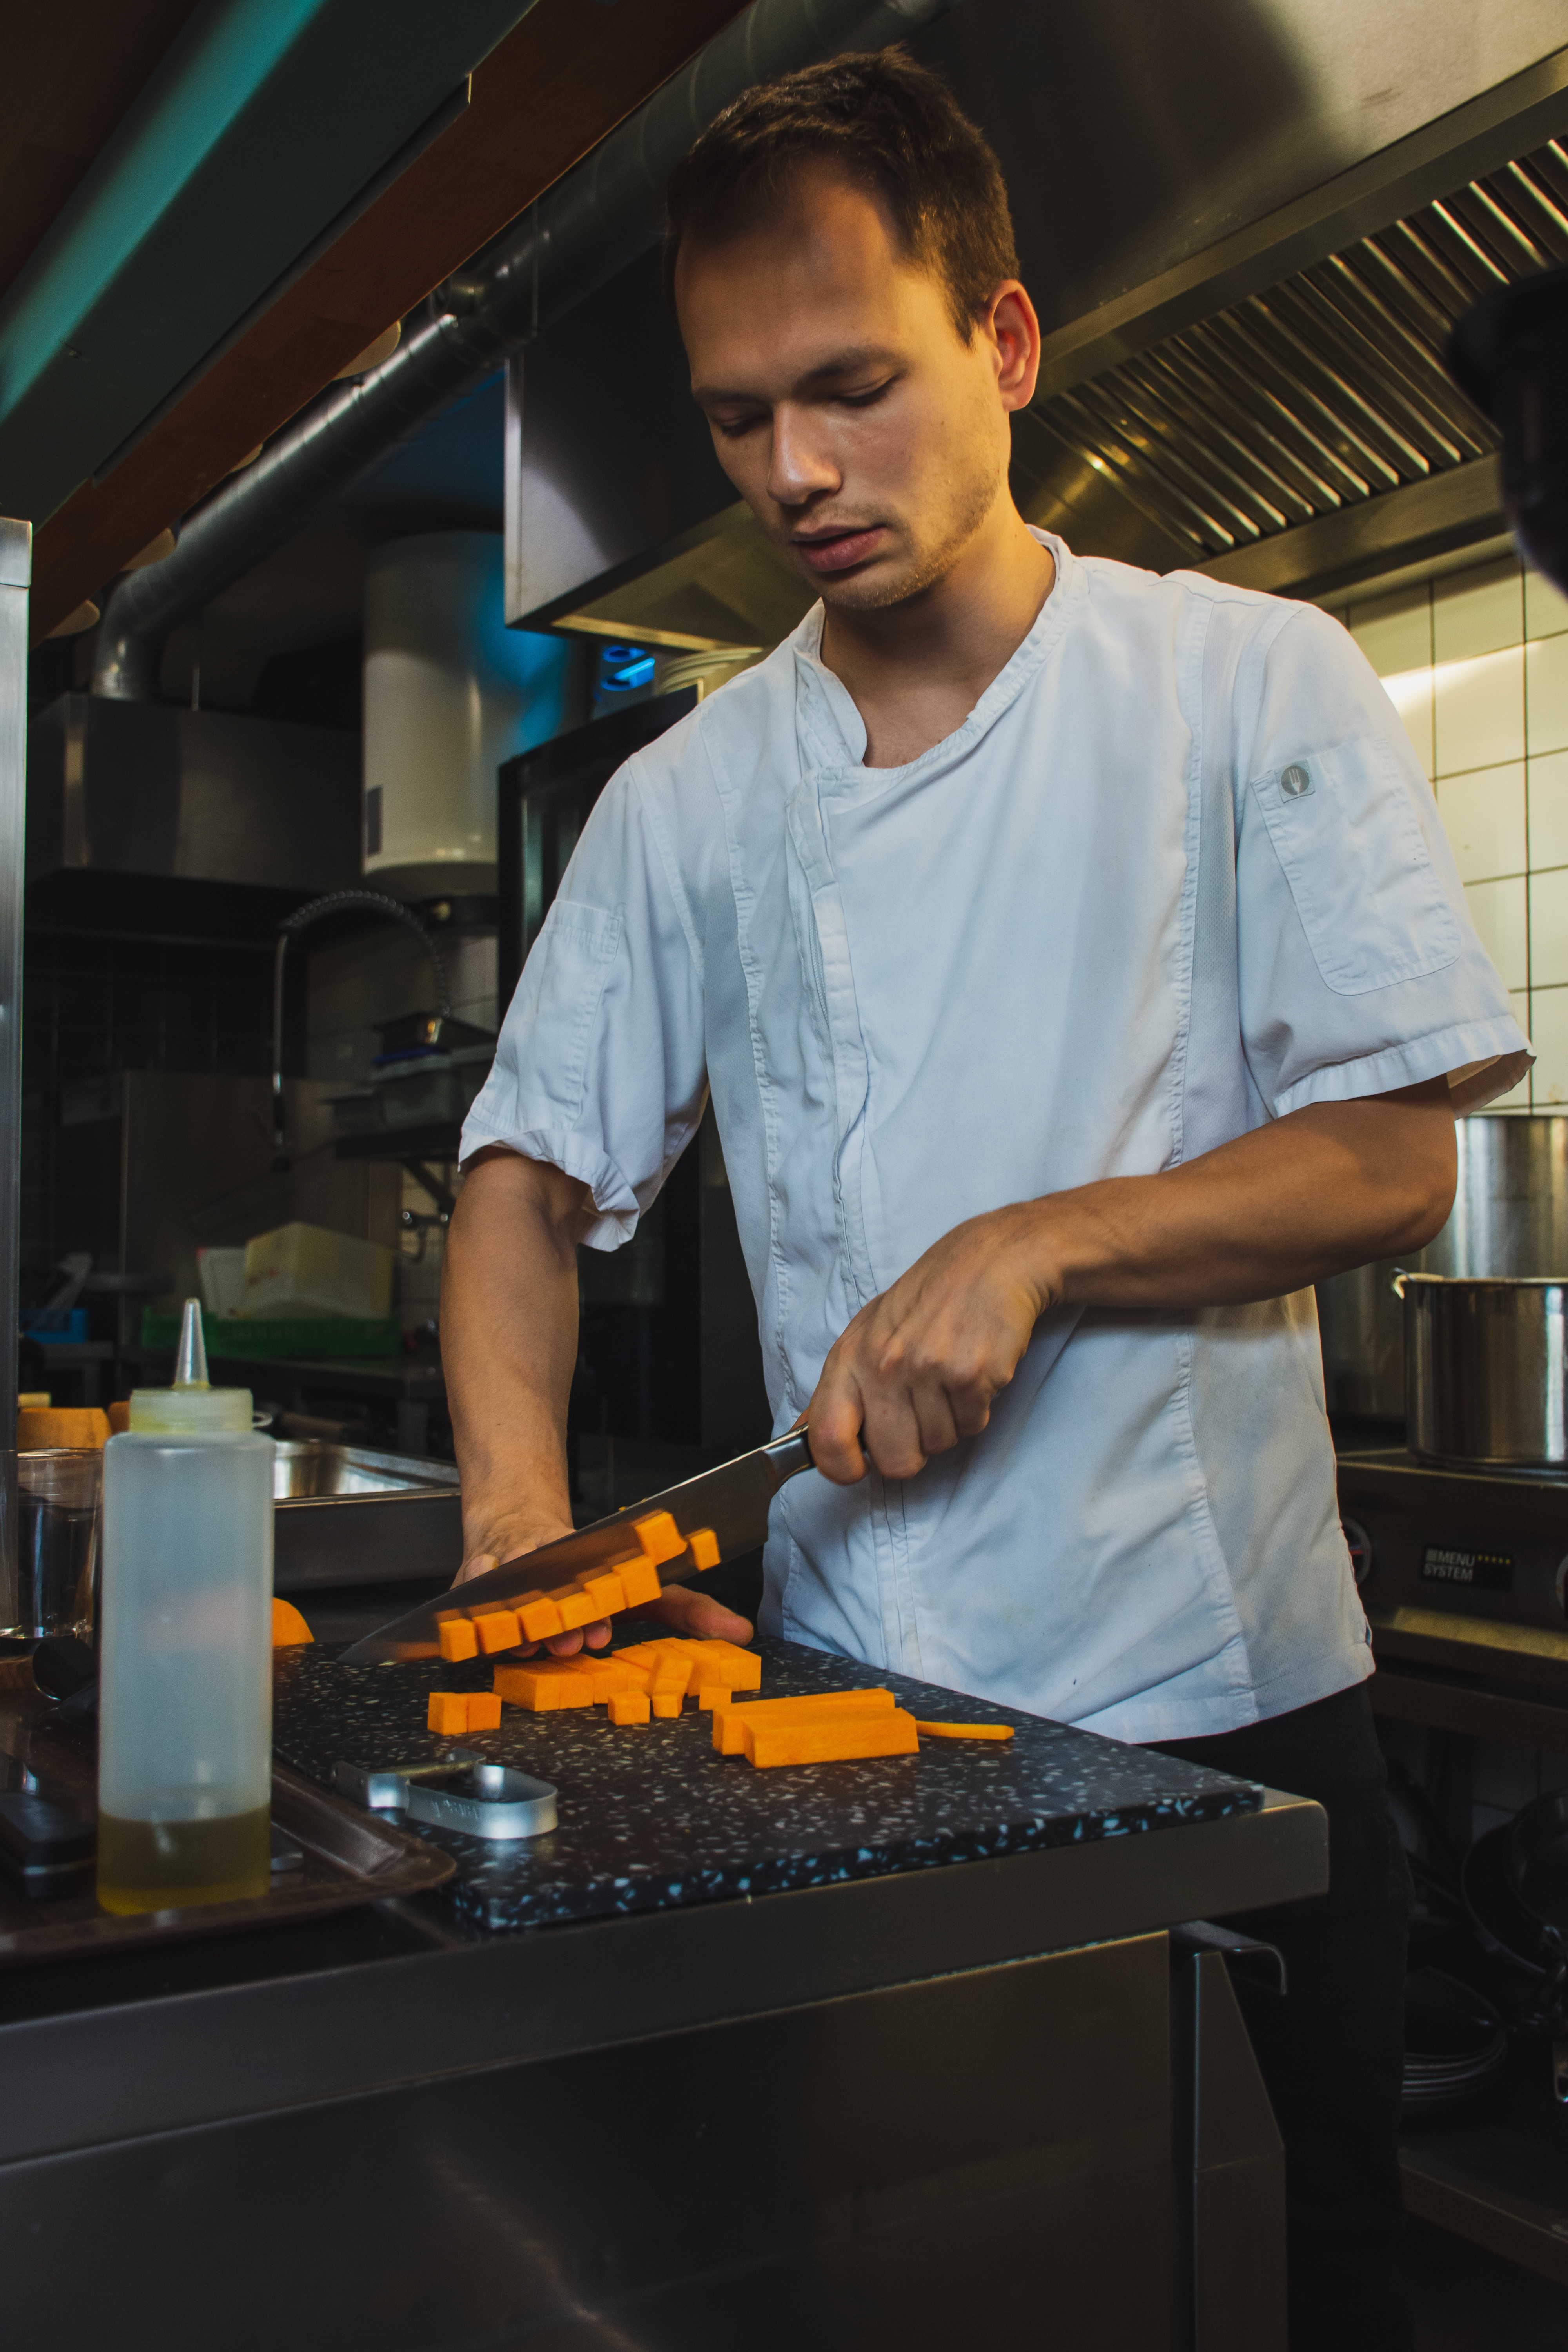 Chef cutting carrots in kitchen